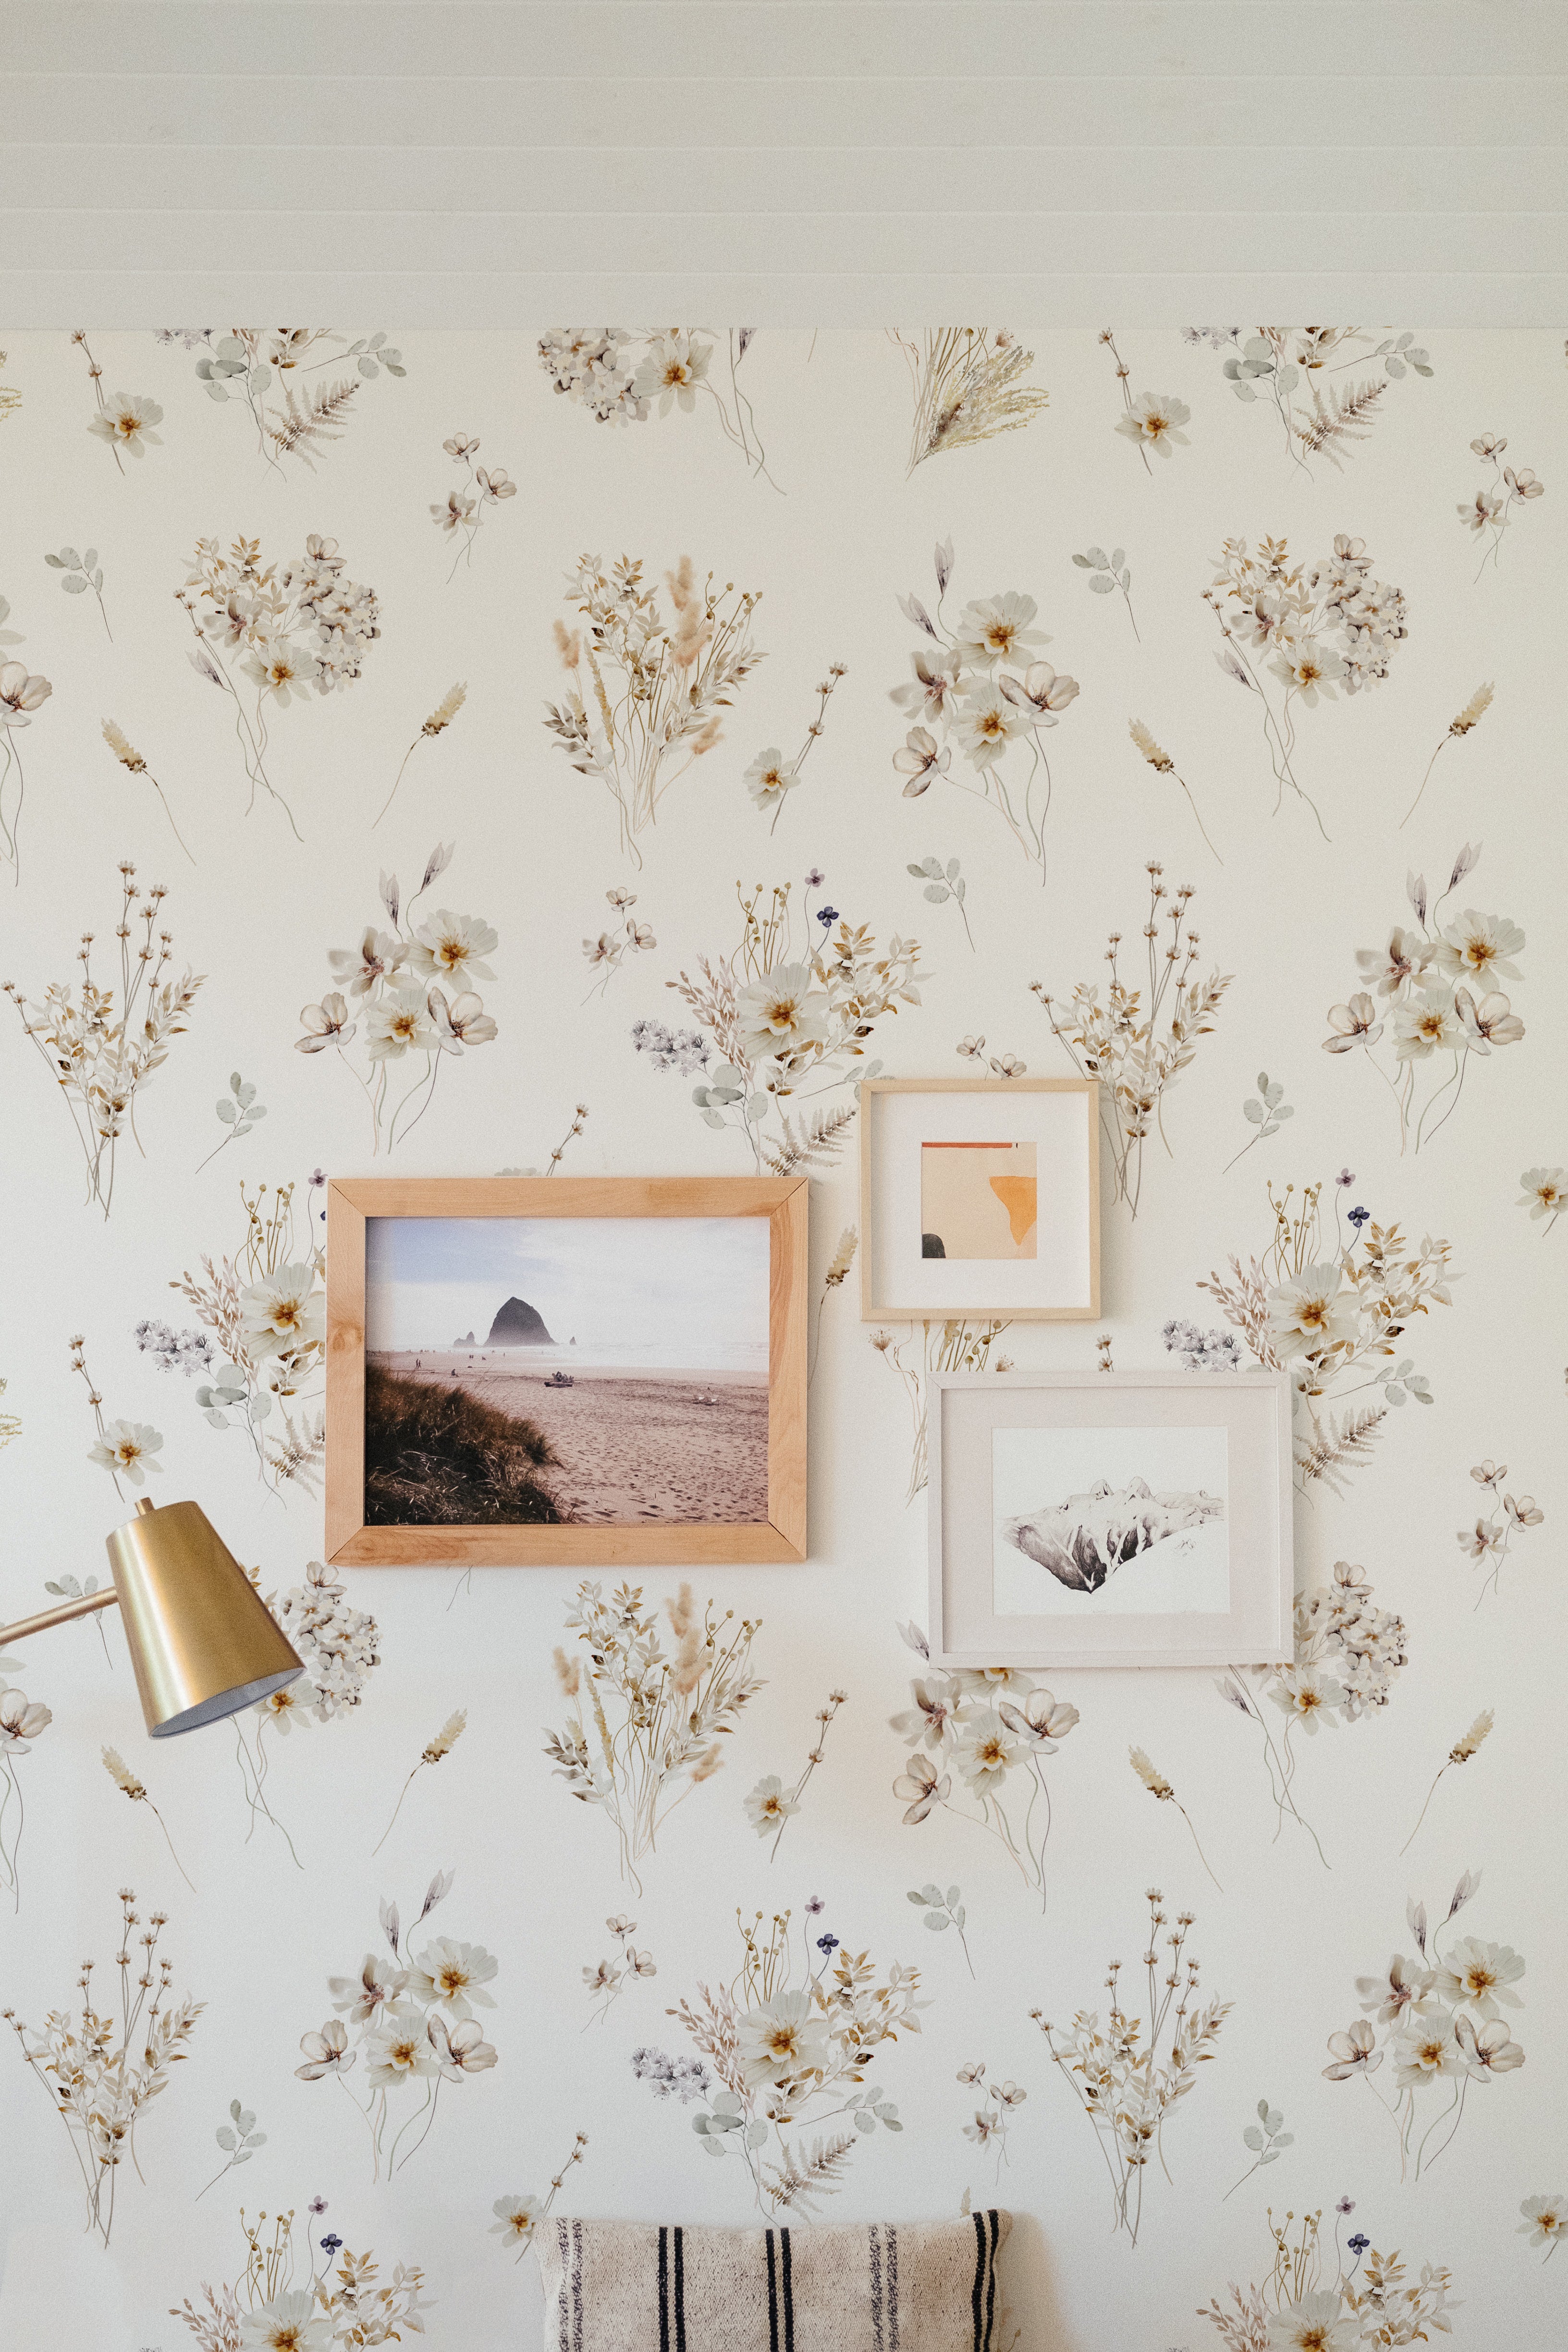 A charming interior wall adorned with 'Meadow Muse Wallpaper', interspersed with wooden frames of artwork, complemented by a vintage gold reading lamp, creating a cozy and artistic atmosphere.